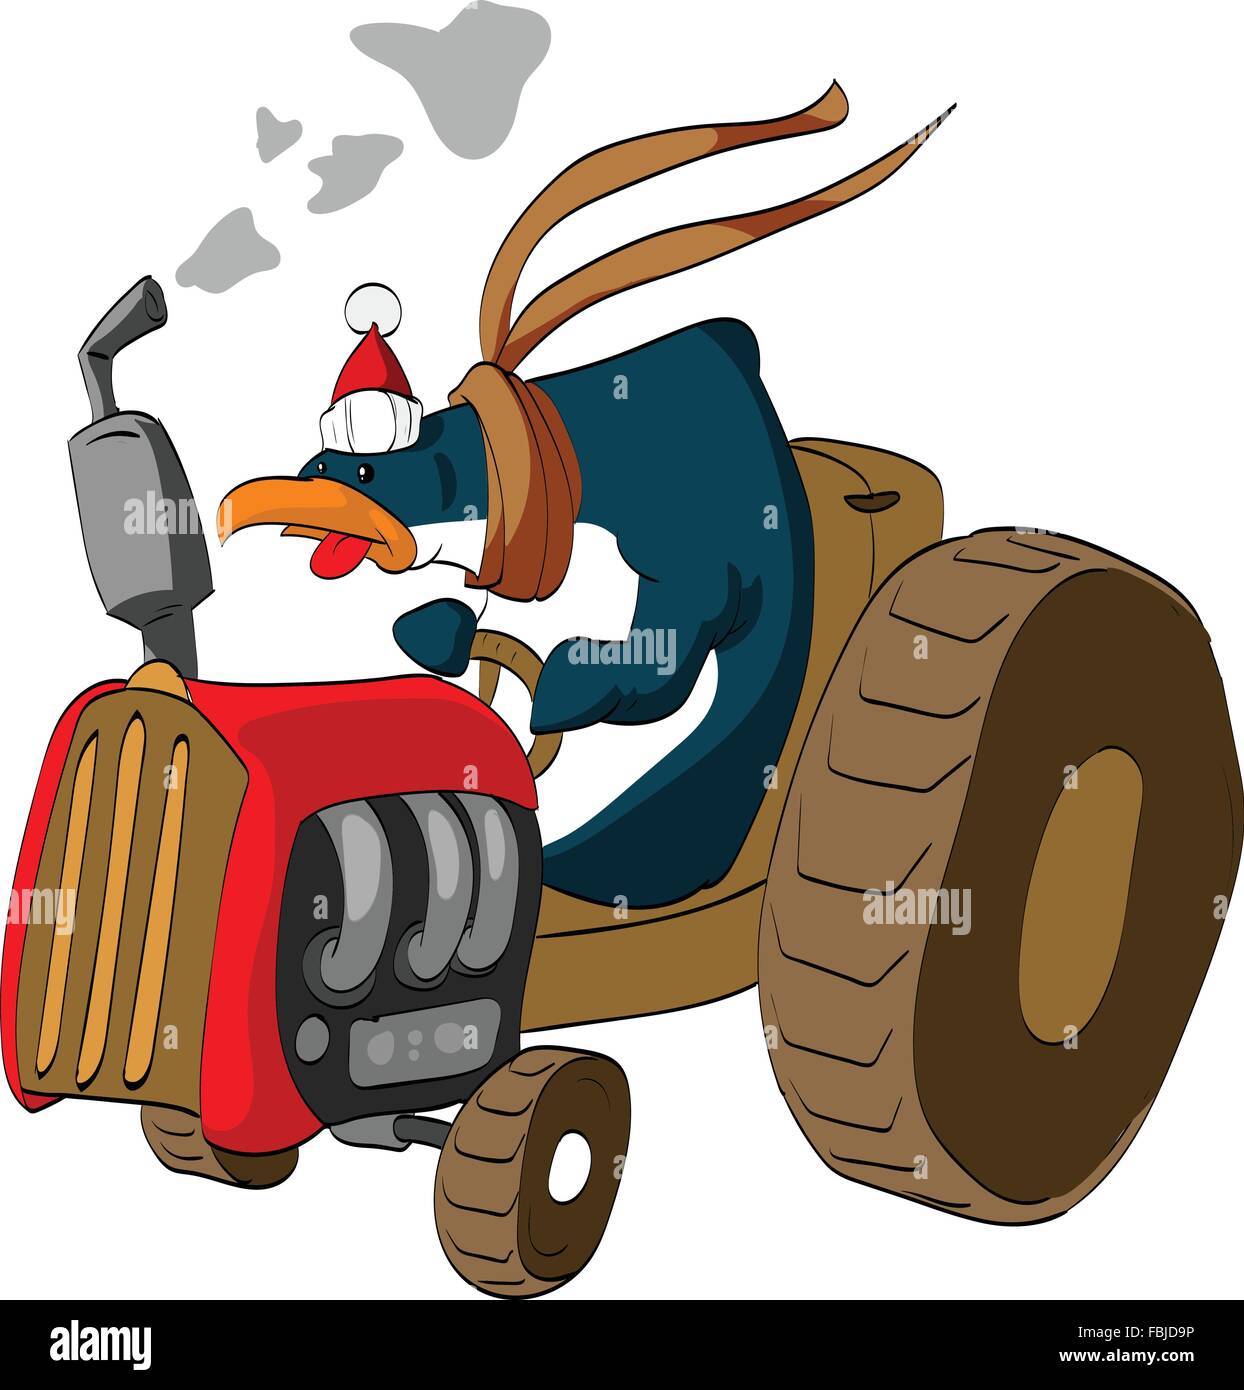 Cartoon penguin with Christmas hat, riding a tractor. Stock Vector